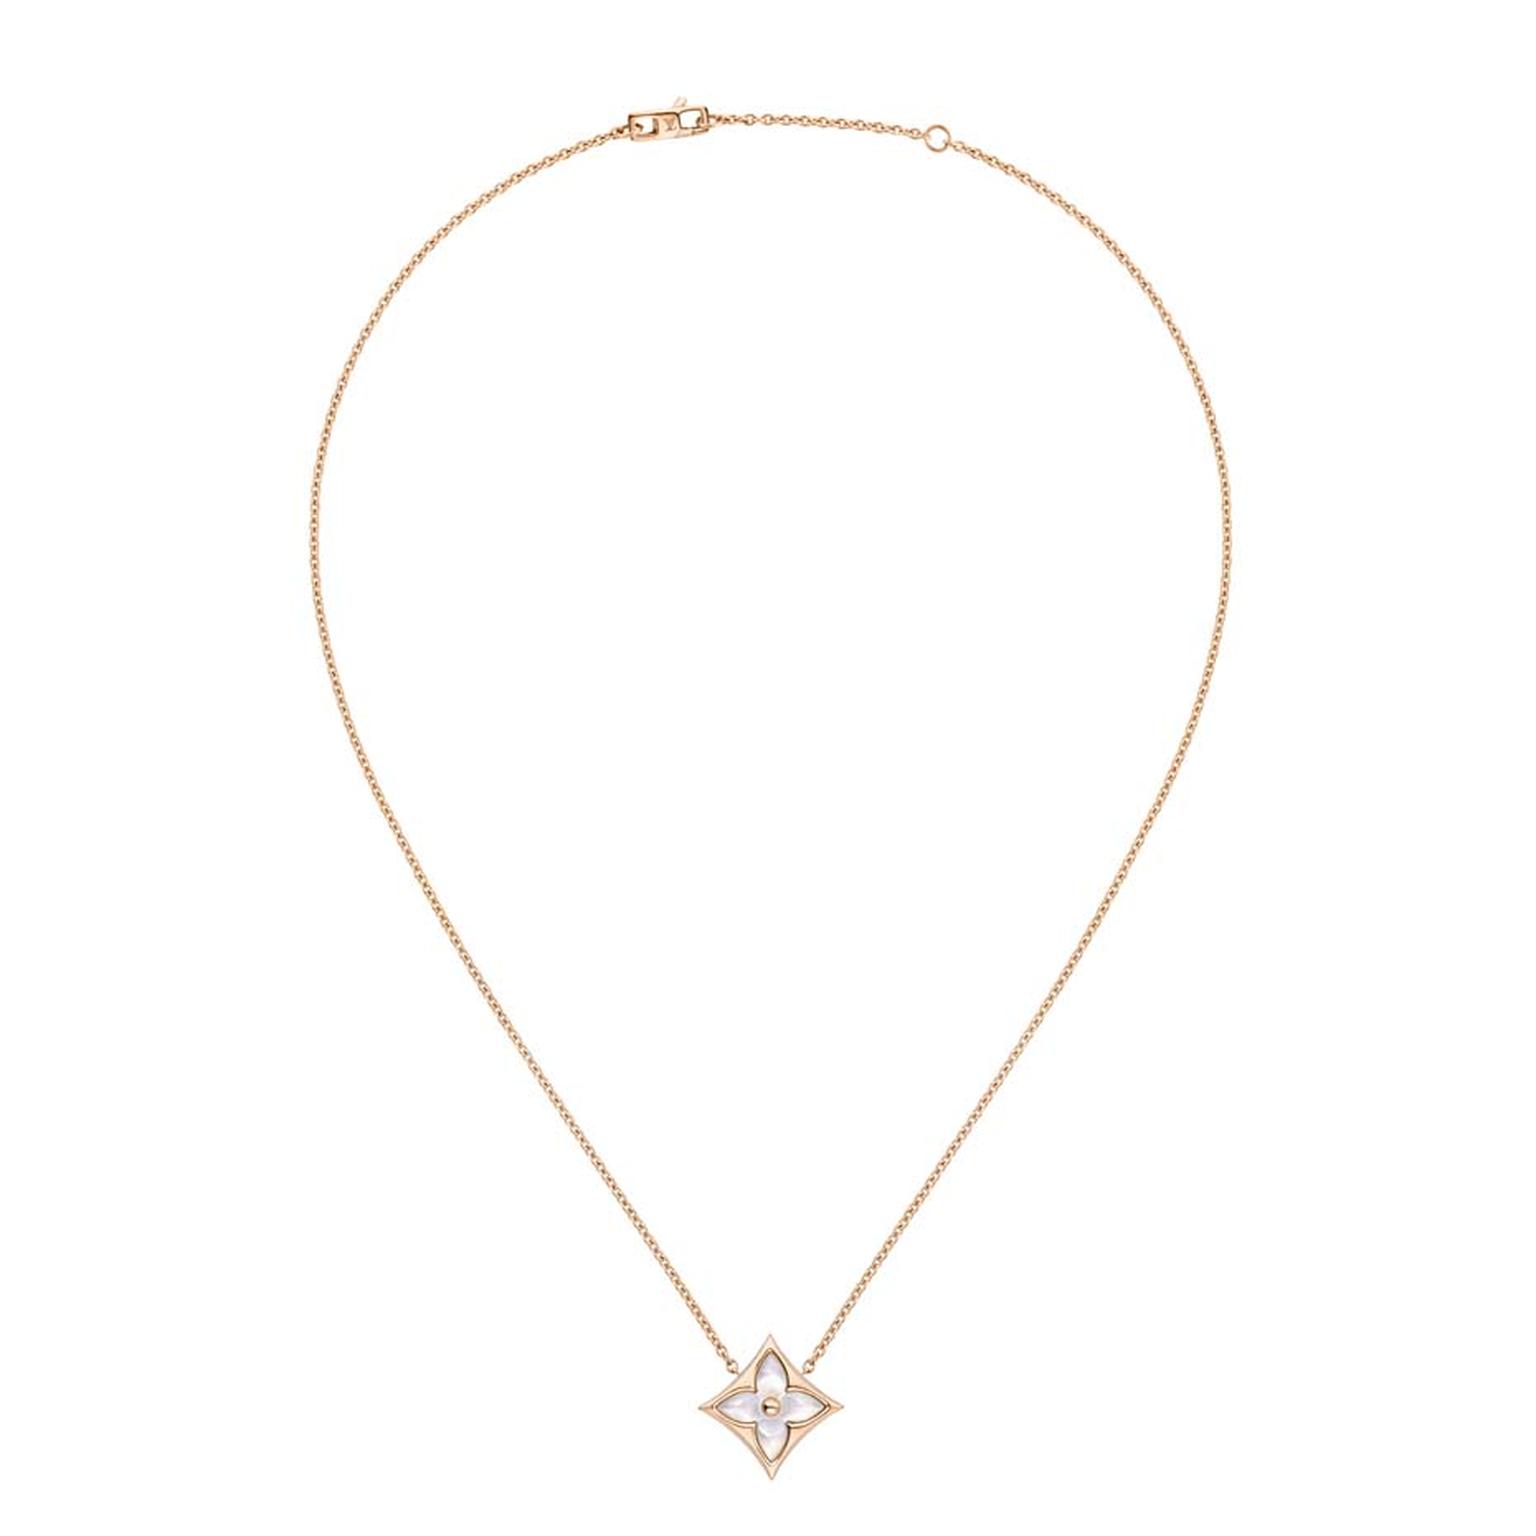 Louis Vuitton Monogram Sun and Star collection mother of pearl star necklace.jpg